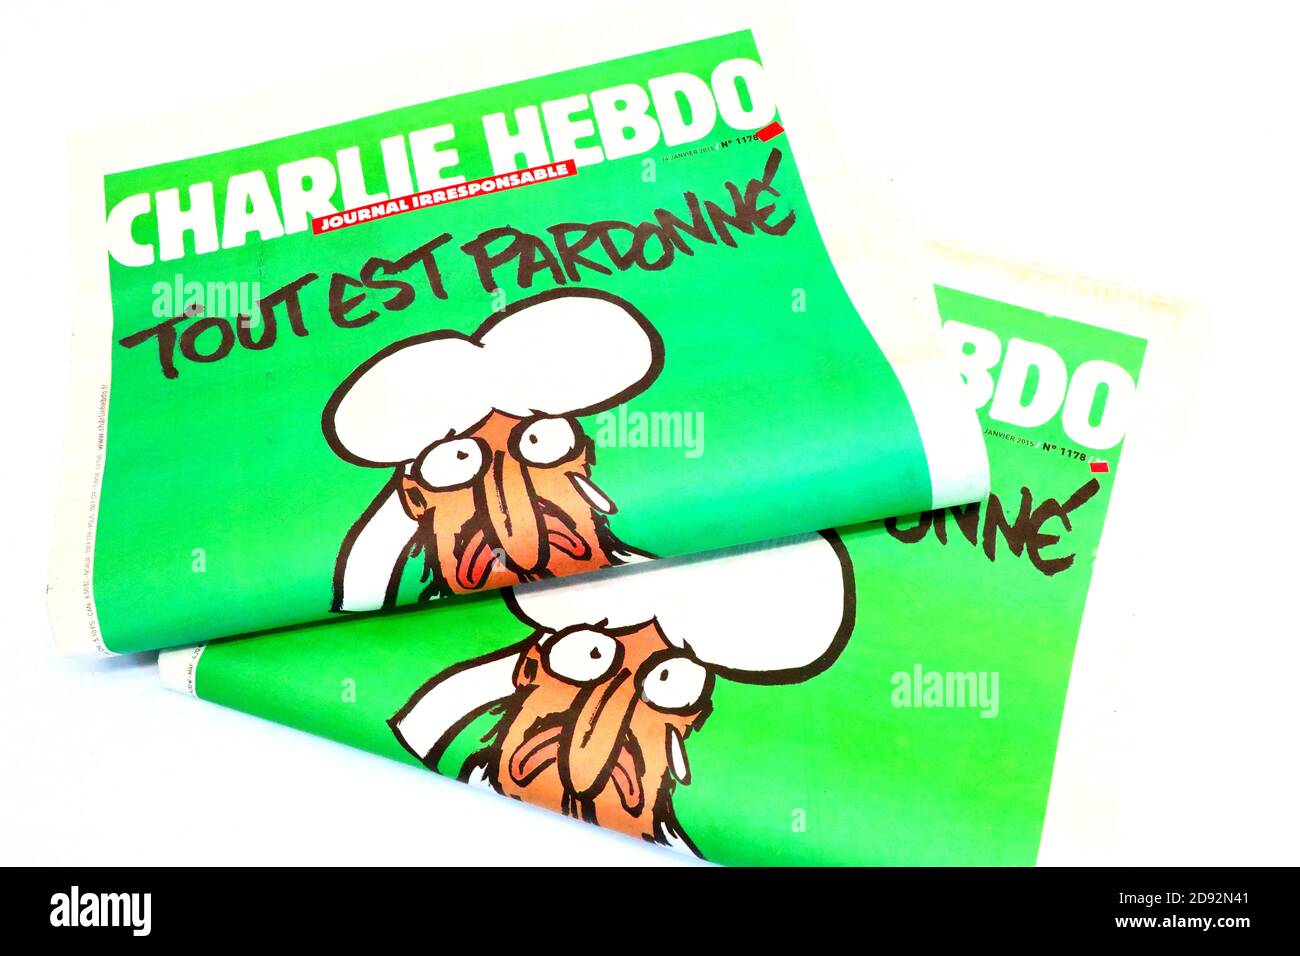 French satirical weekly CHARLIE HEBDO No. 1178, published on January 14, 2015. The first issue after the Charlie Hebdo shooting on January 7, 2015 Stock Photo